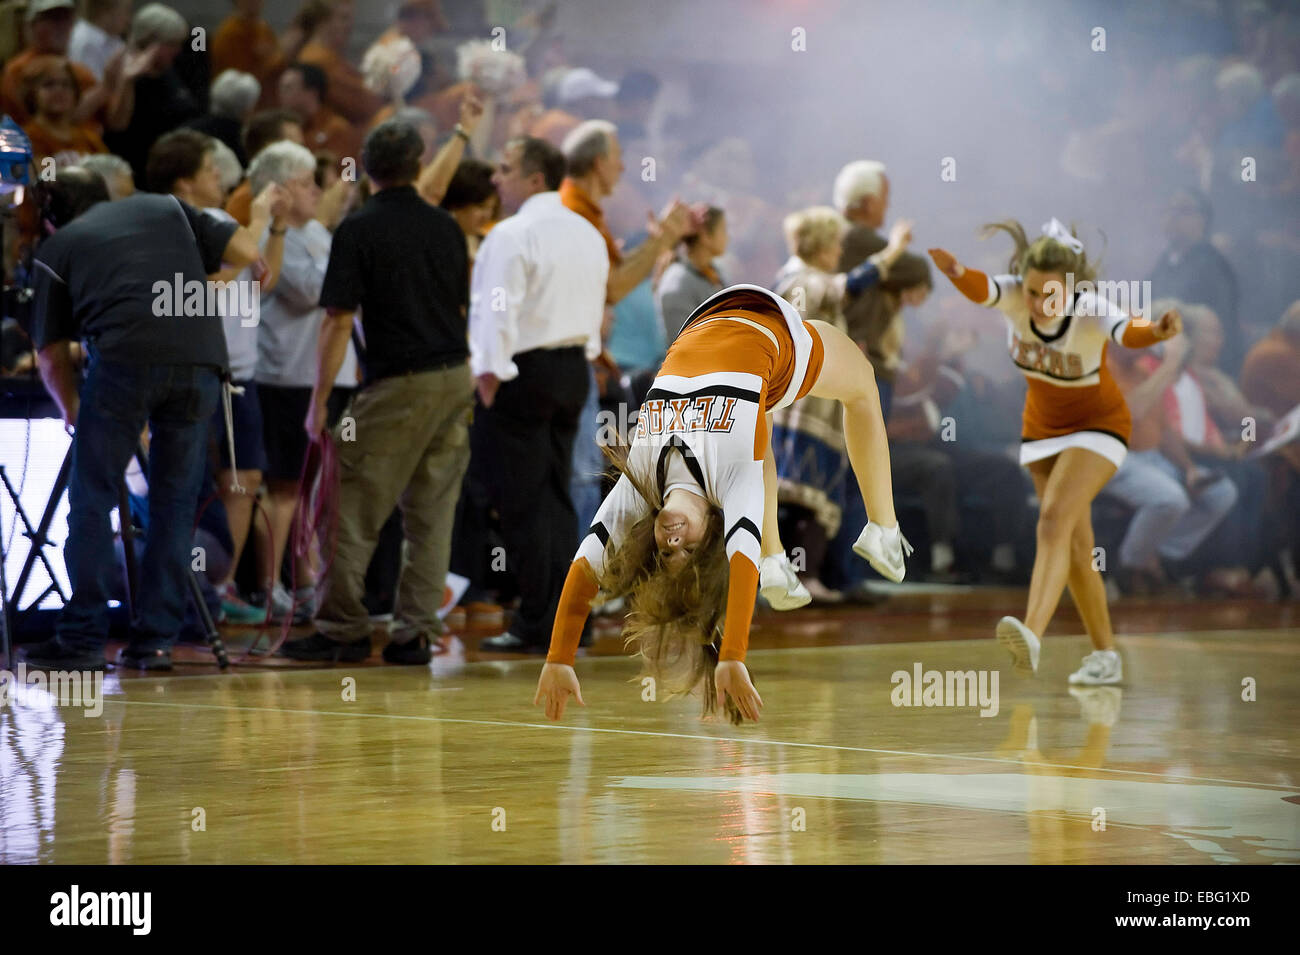 Tx. 30th Nov, 2012. Texas Longhorns Cheerleaders in action during the NCAA Women's Basketball game between Tennessee Lady Vols at the Frank Erwin Center in Austin TX. © csm/Alamy Live News Stock Photo